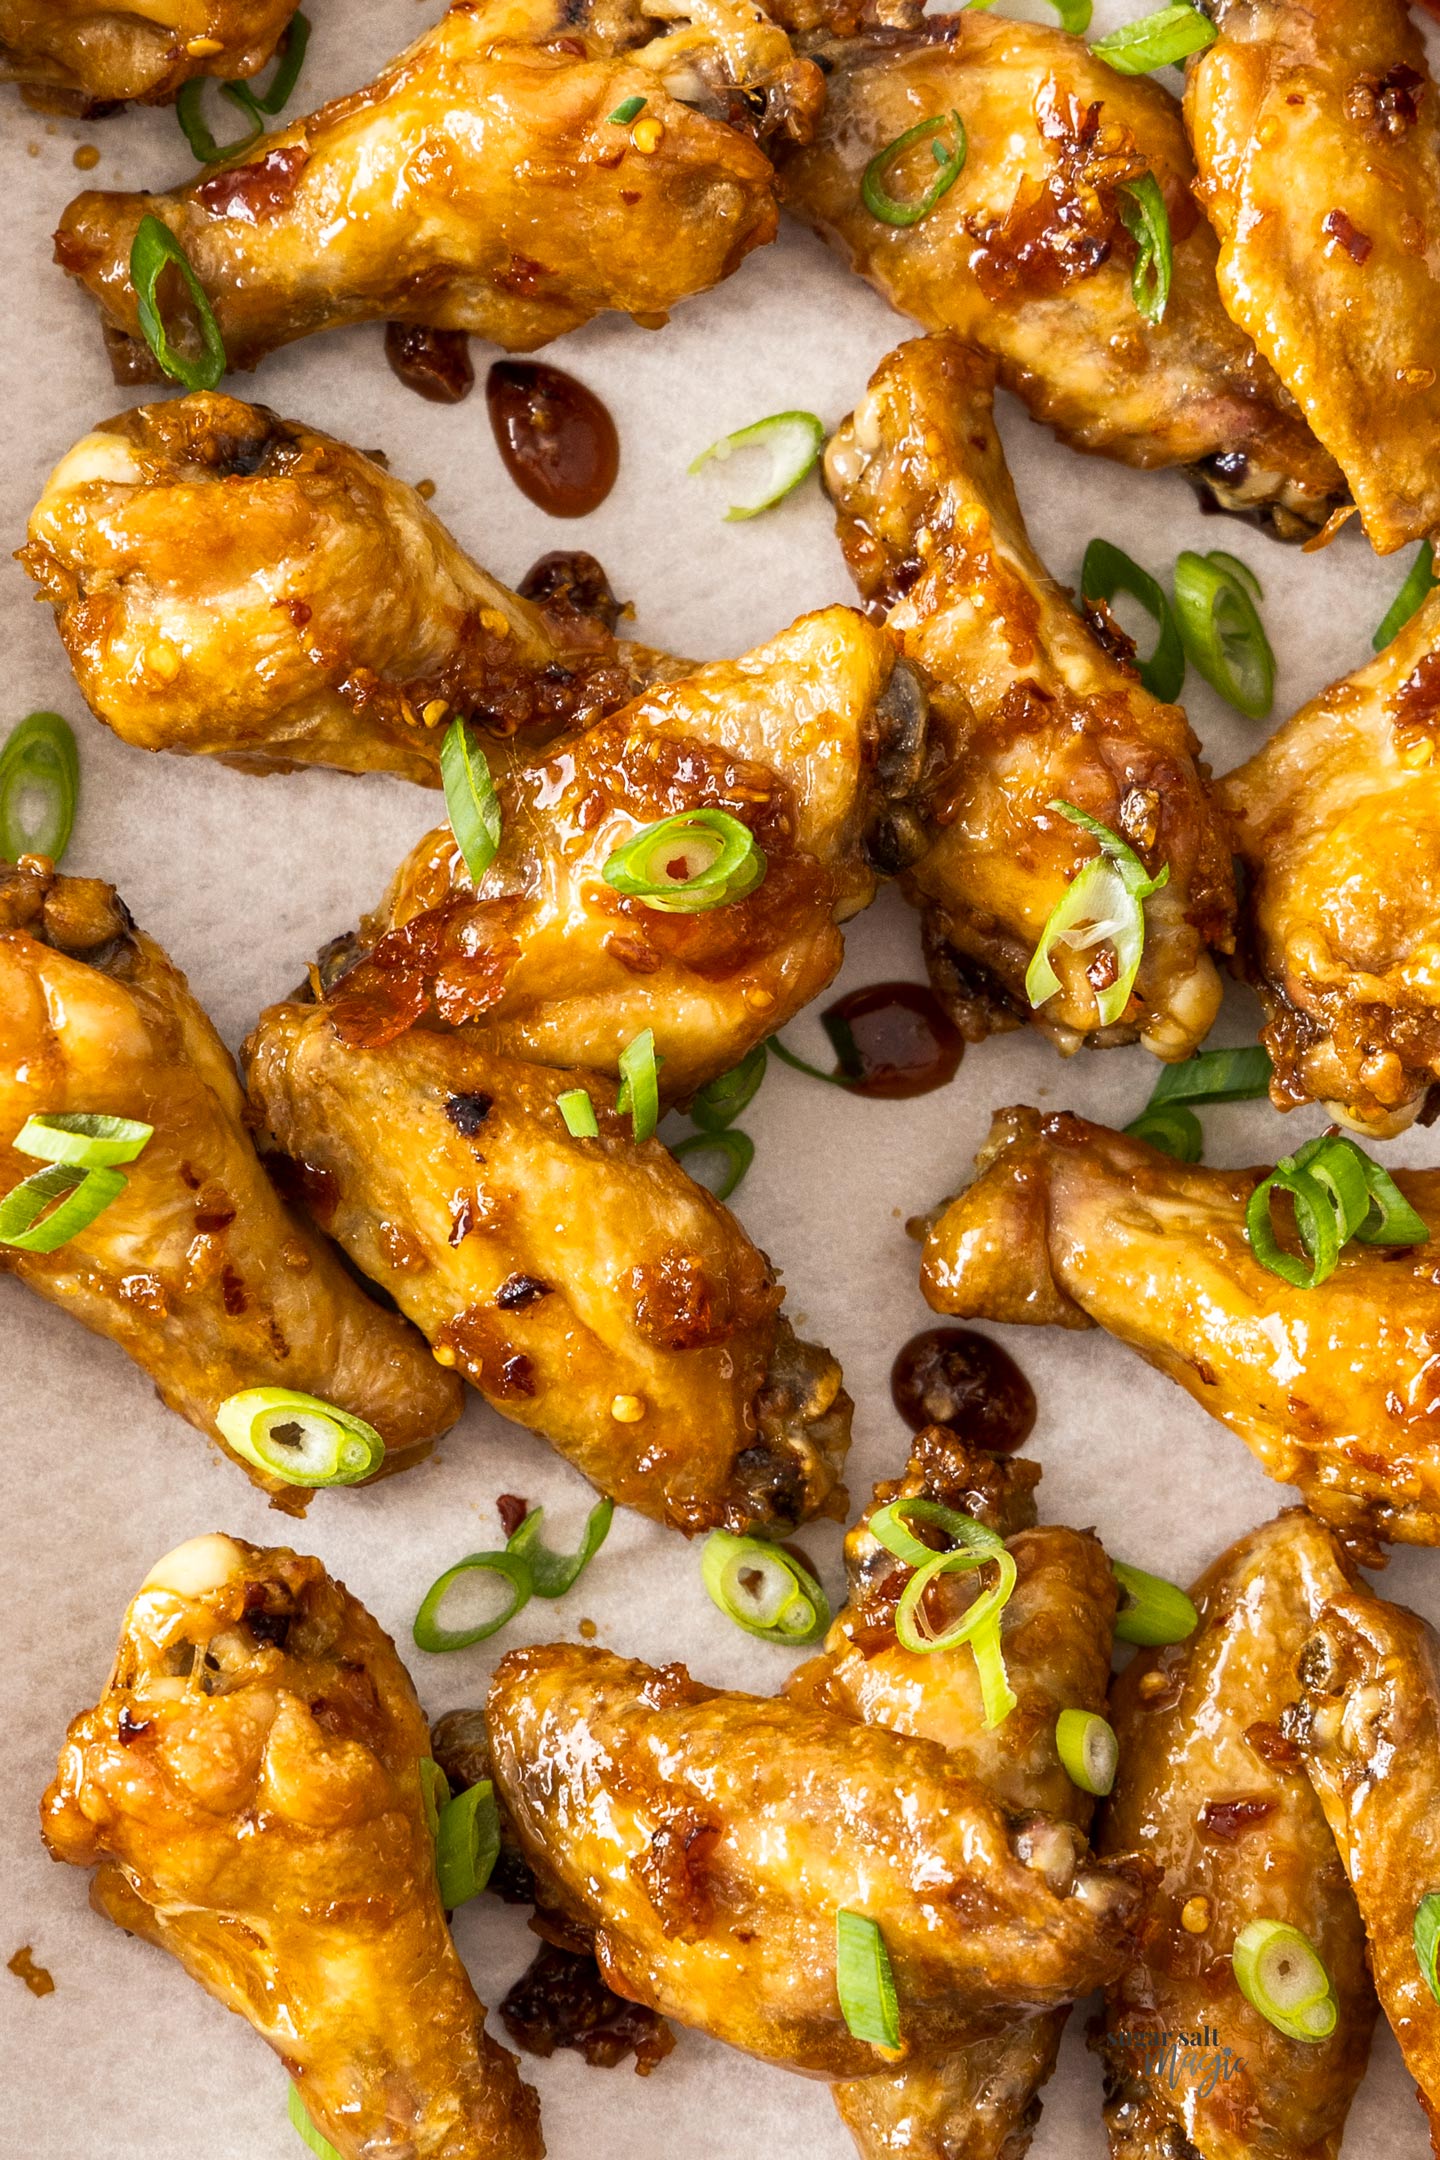 Top down view of a batch of chicken wings on a tray.